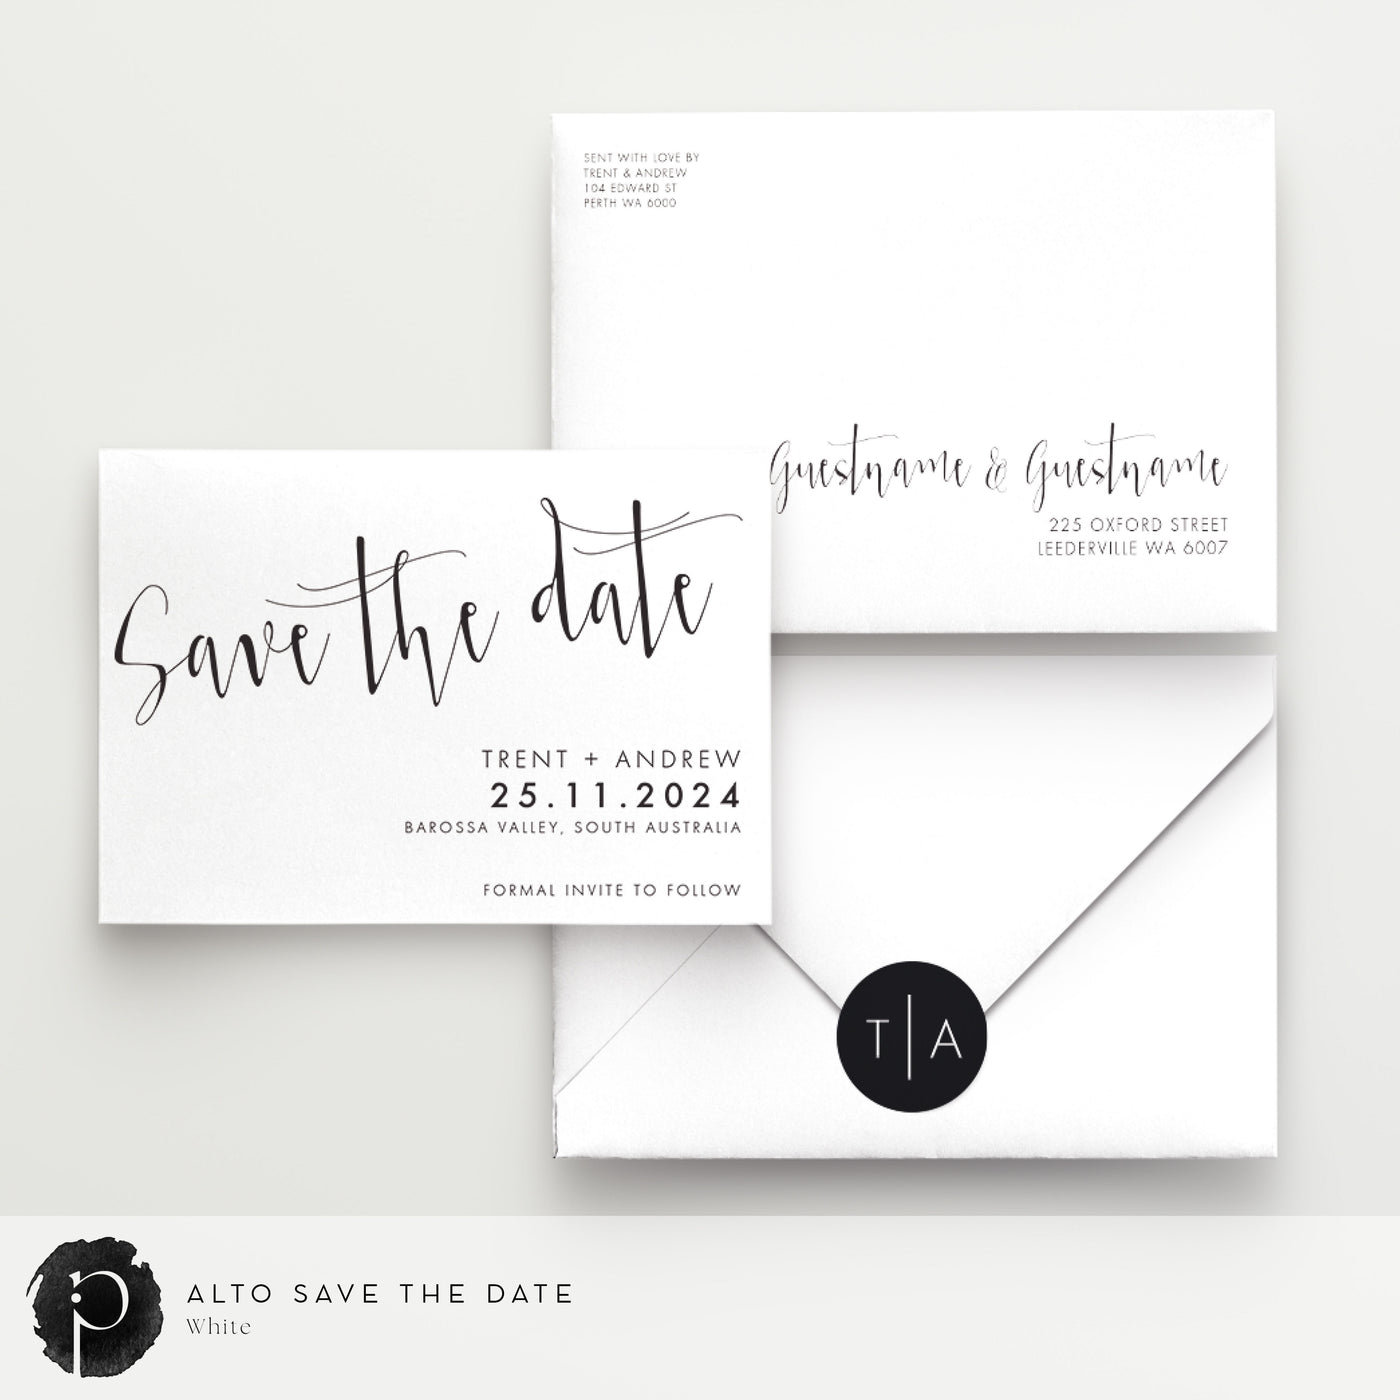 Alto - Save The Date Cards